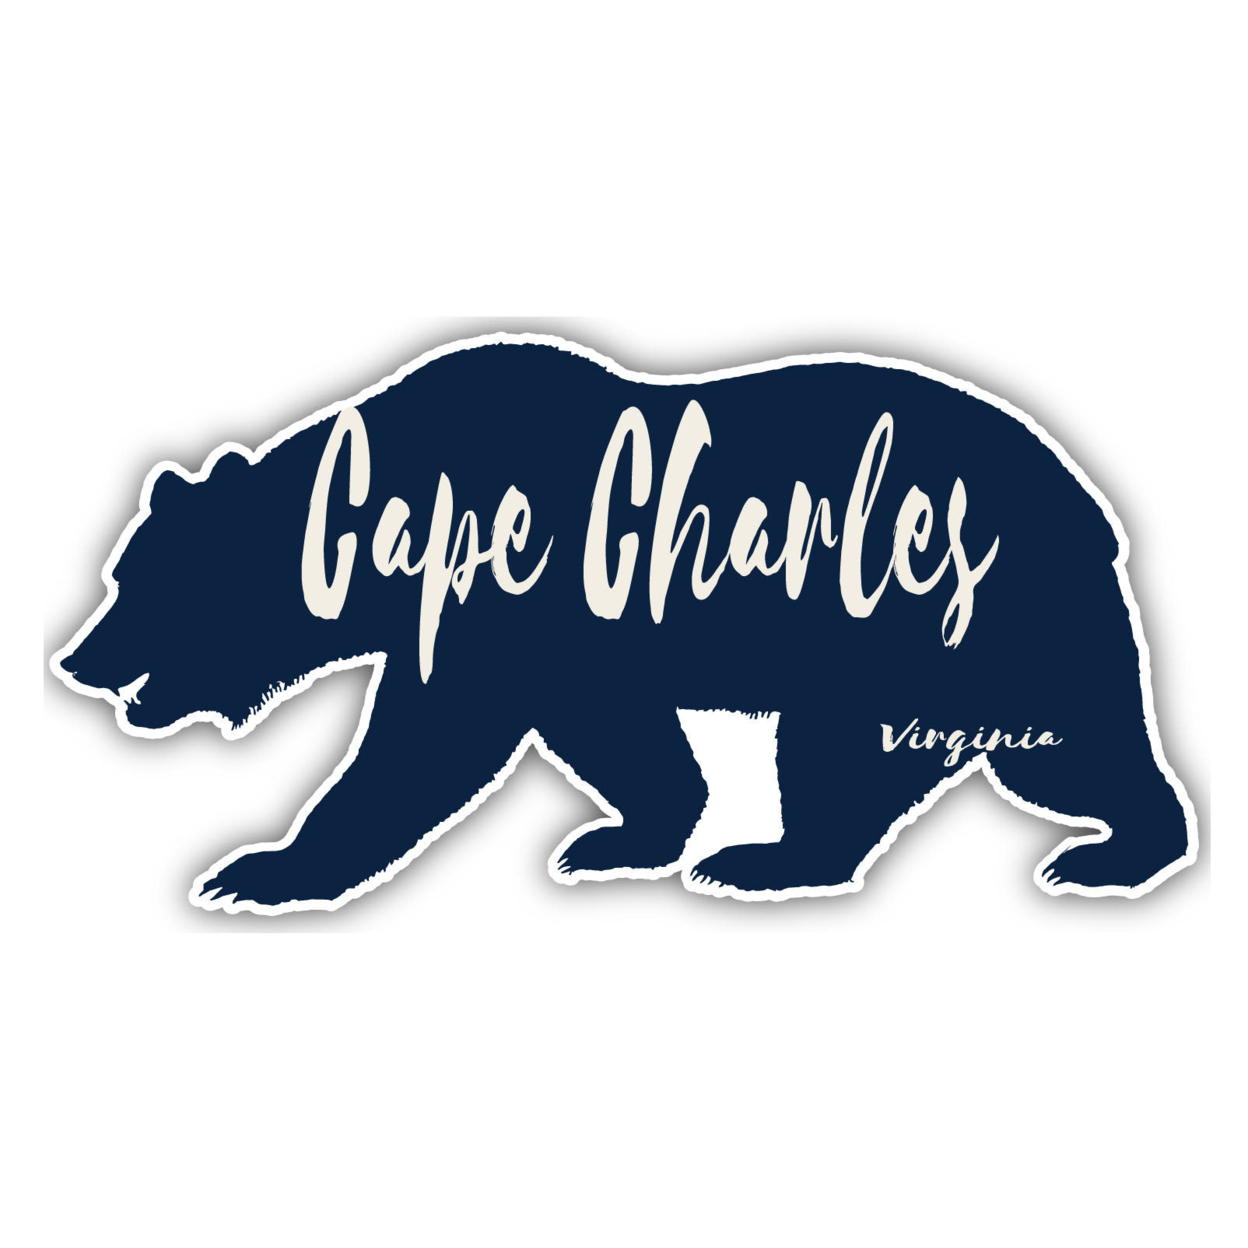 Cape Charles Virginia Souvenir Decorative Stickers (Choose Theme And Size) - 4-Pack, 6-Inch, Tent